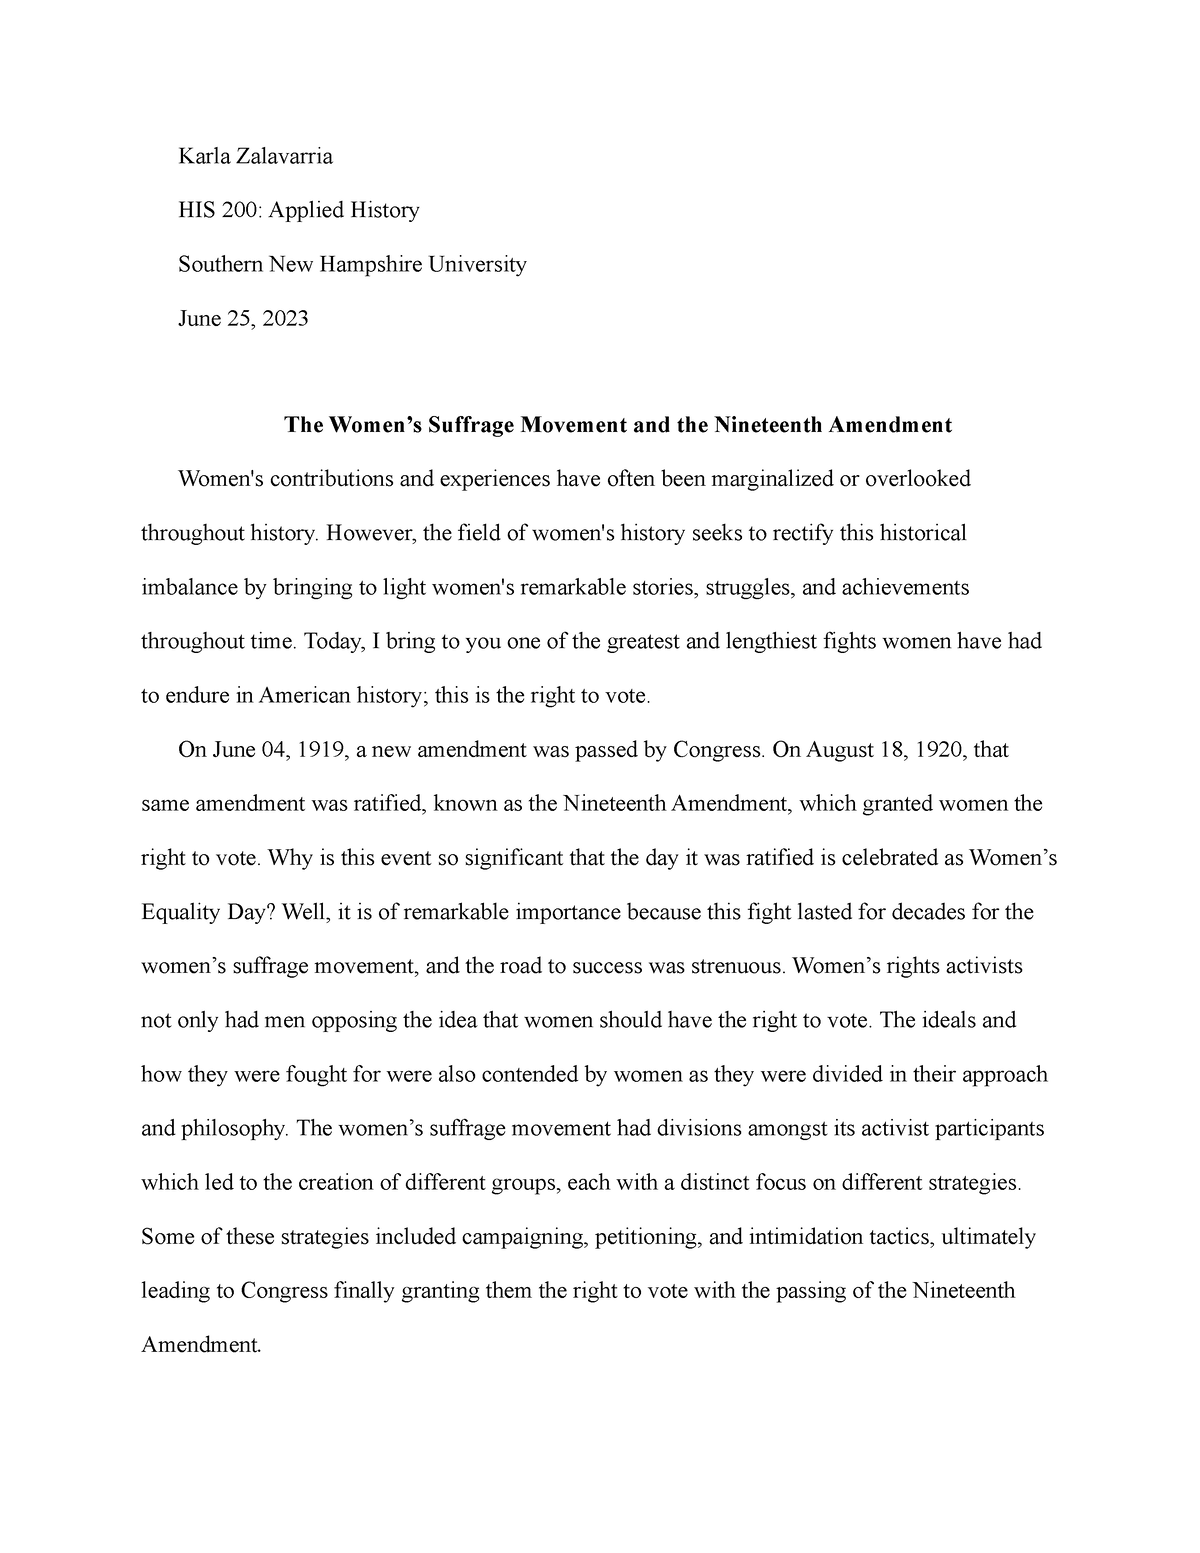 Module 8 8 3 Project 2 Historical Analysis Essay Submission Karla Zalavarria His 200 Applied